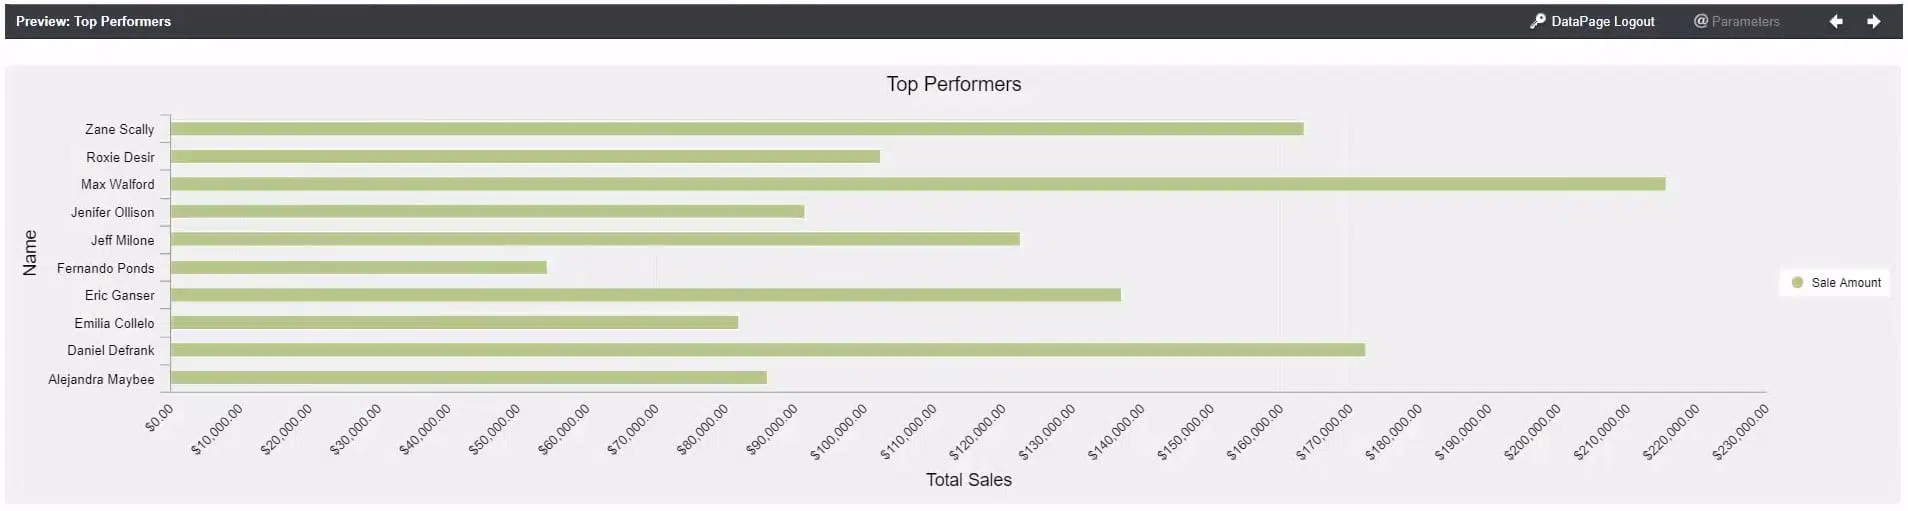 Screenshot of a preview of a sample sales app, showing a graph showing the Top Performers against Total Sales.